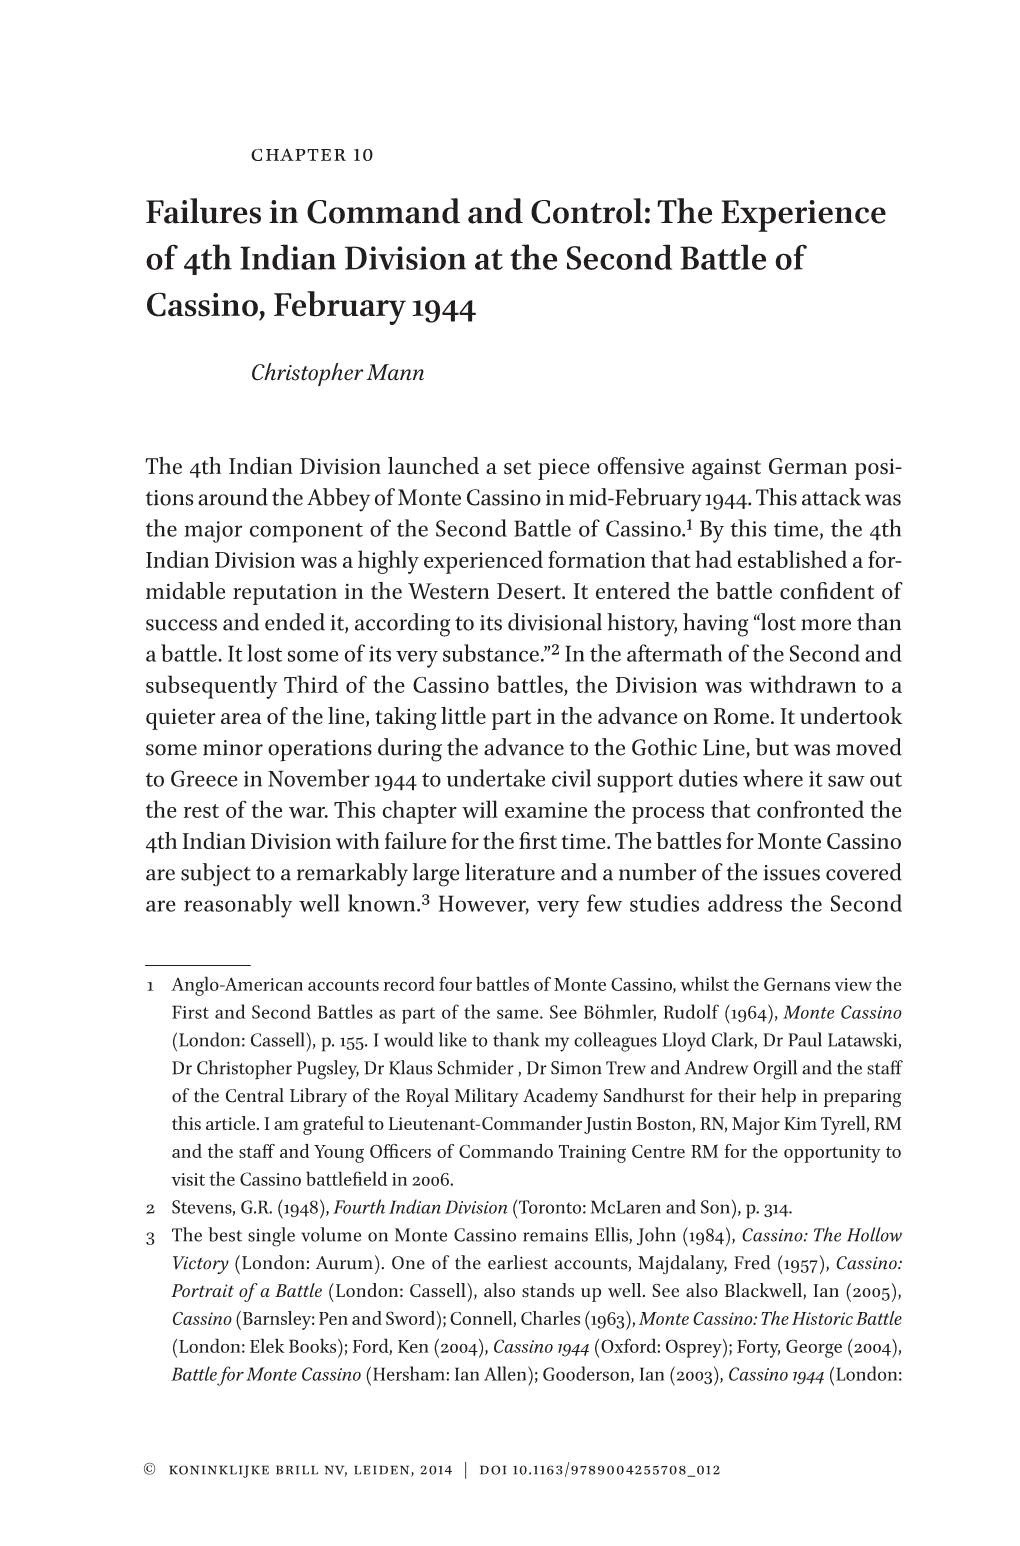 Failures in Command and Control: the Experience of 4Th Indian Division at the Second Battle of Cassino, February 1944